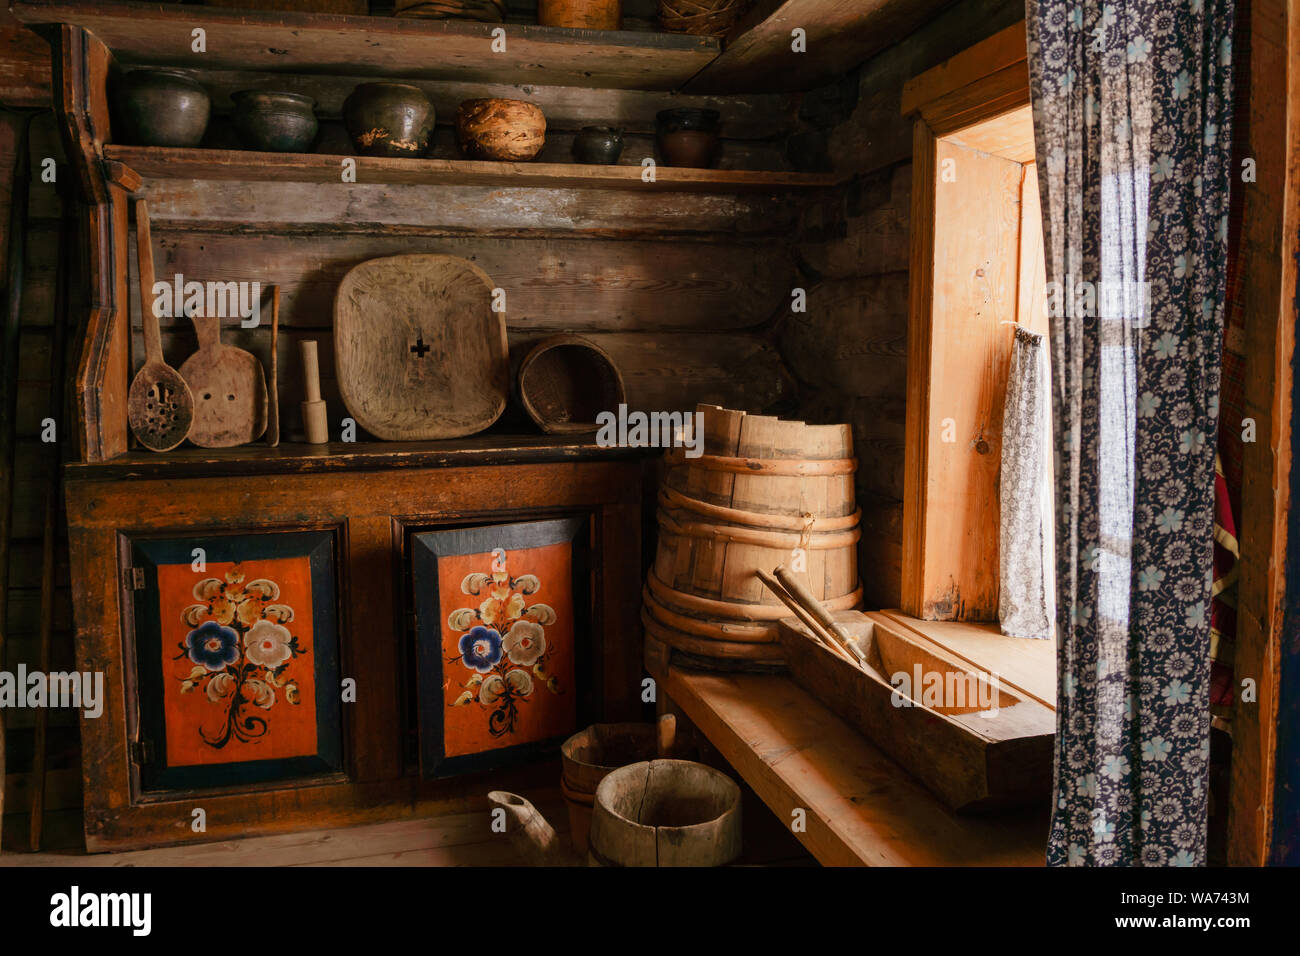 https://c8.alamy.com/comp/WA743M/fragment-of-the-interior-of-an-old-peasant-log-cabin-wooden-household-items-and-hand-painted-homemade-buffet-painting-created-in-the-19th-century-WA743M.jpg